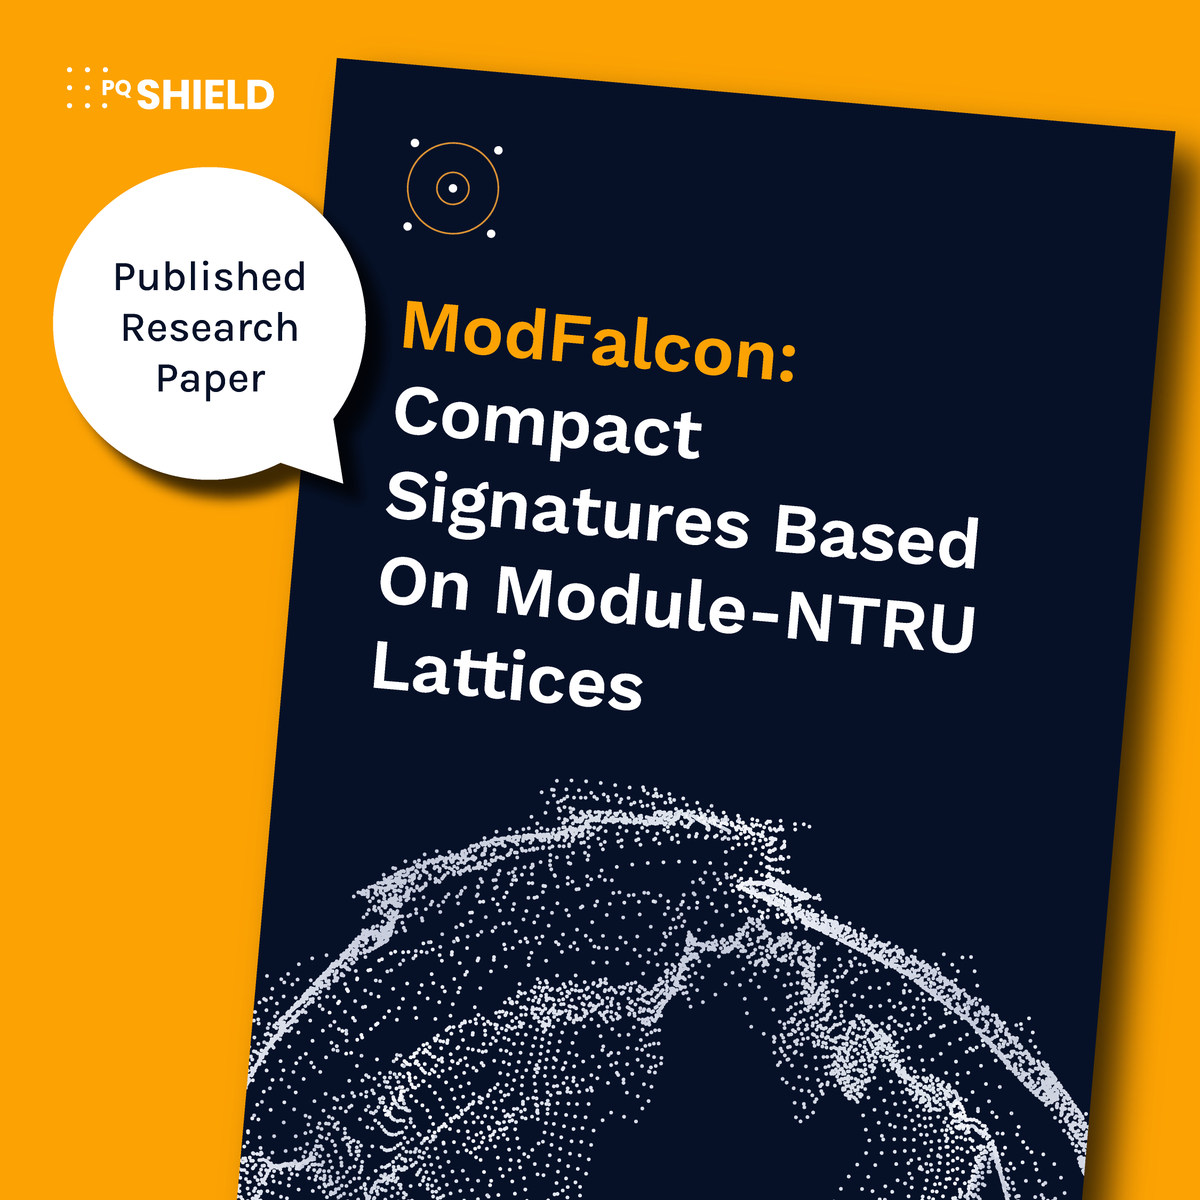 **PAPERS FROM THE PQSHIELD ARCHIVES - ModFalcon: Compact Signatures Based On Module-NTRU Lattices hubs.li/Q02xJhyv0 #falcon #postquantum #digitalsignatures #cryptography #pqc #latticecryptography